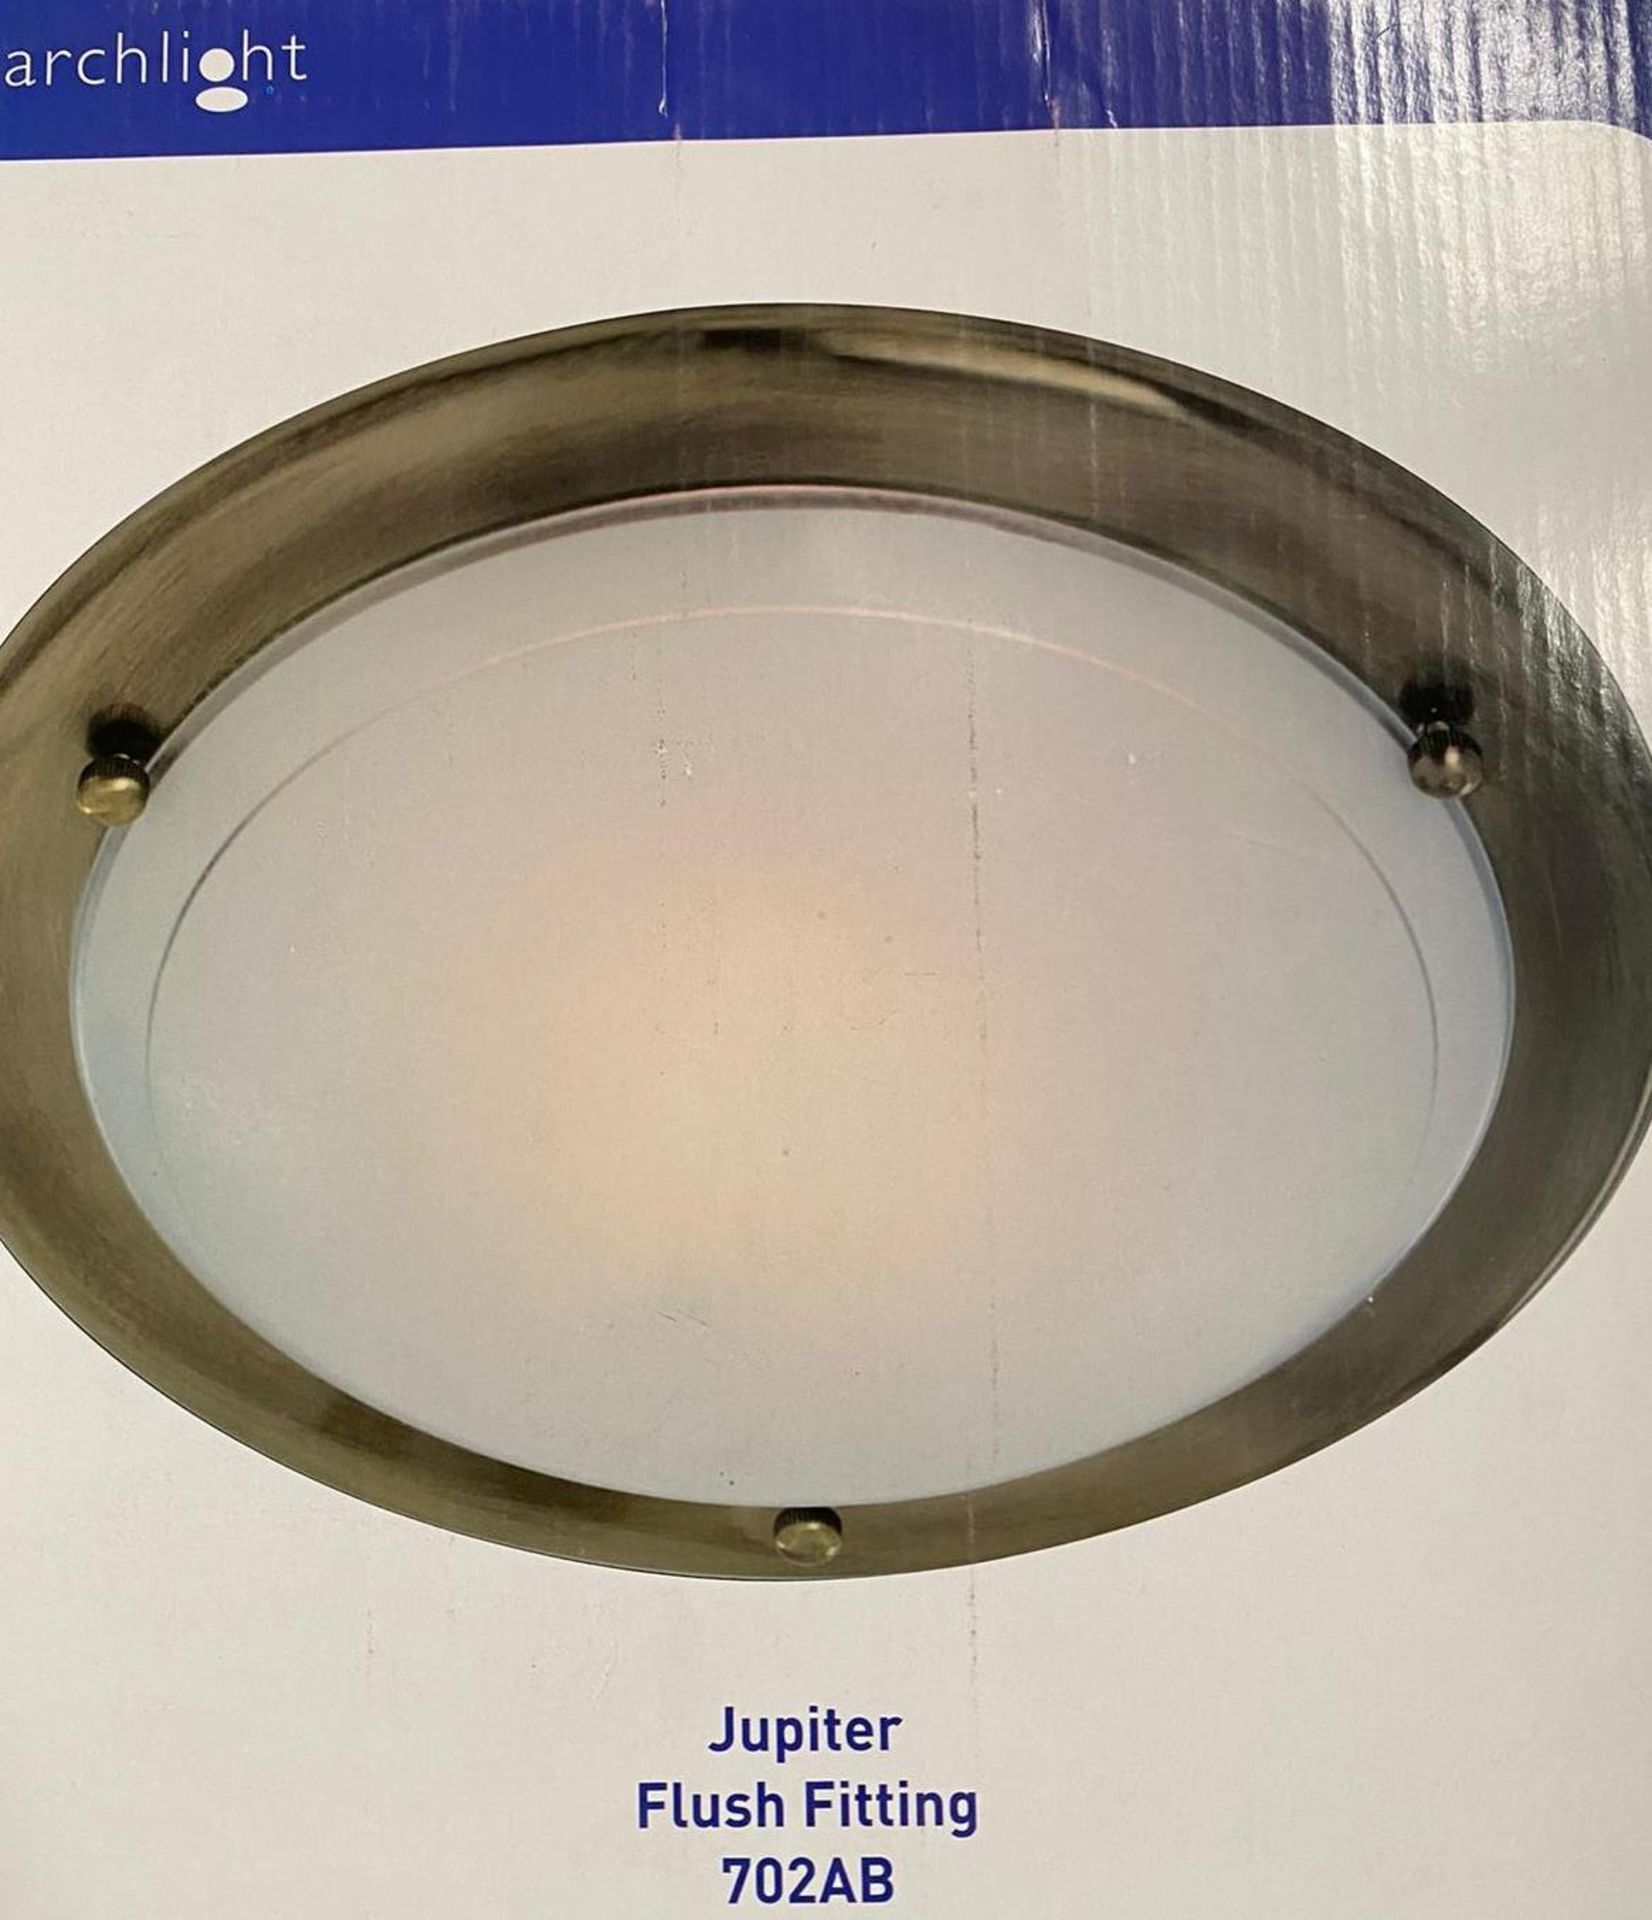 3 x Searchlight Jupiter Flush Fitting in Antique Brass- Ref: 702AB - New and Boxed stock - Image 2 of 4